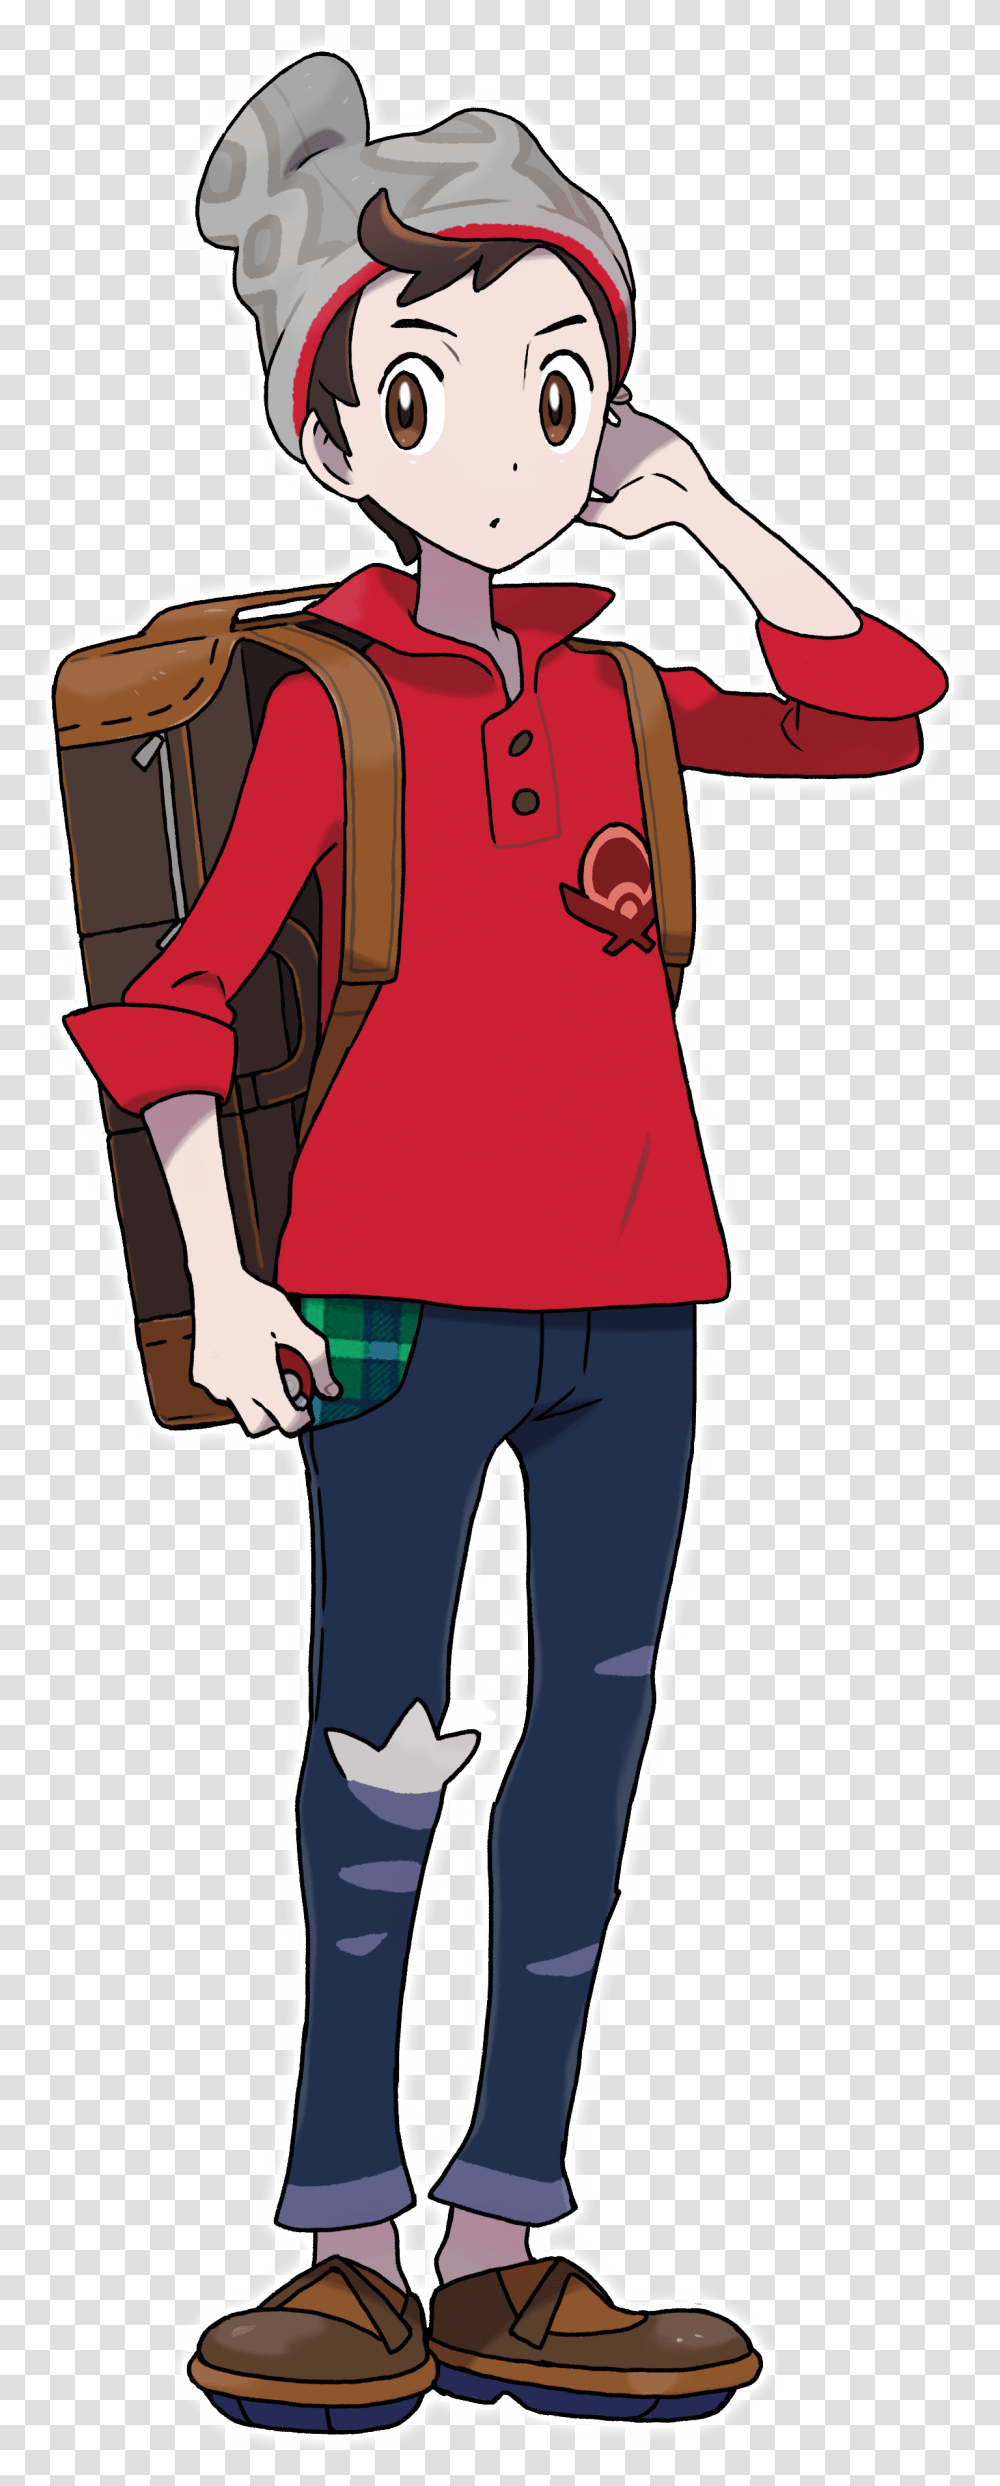 Pokmon Direct Pokmon Sword And Shield June 5th 2019 Pokemon Sword And Shield Protagonists, Clothing, Sleeve, Overcoat, Person Transparent Png